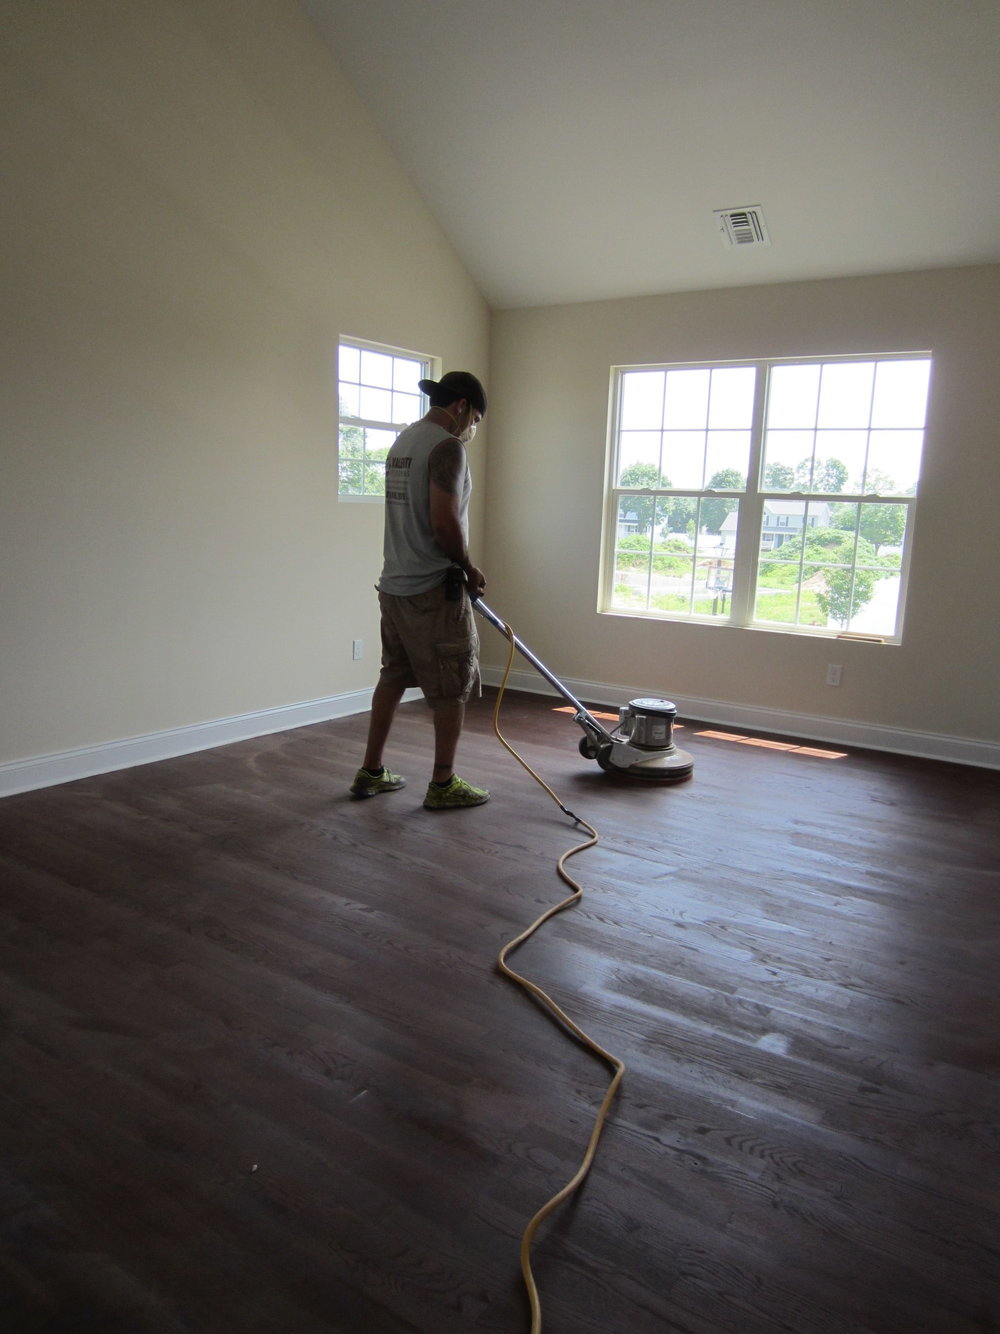 What Is A Screen And Re Coat Aka, Hardwood Floor Process